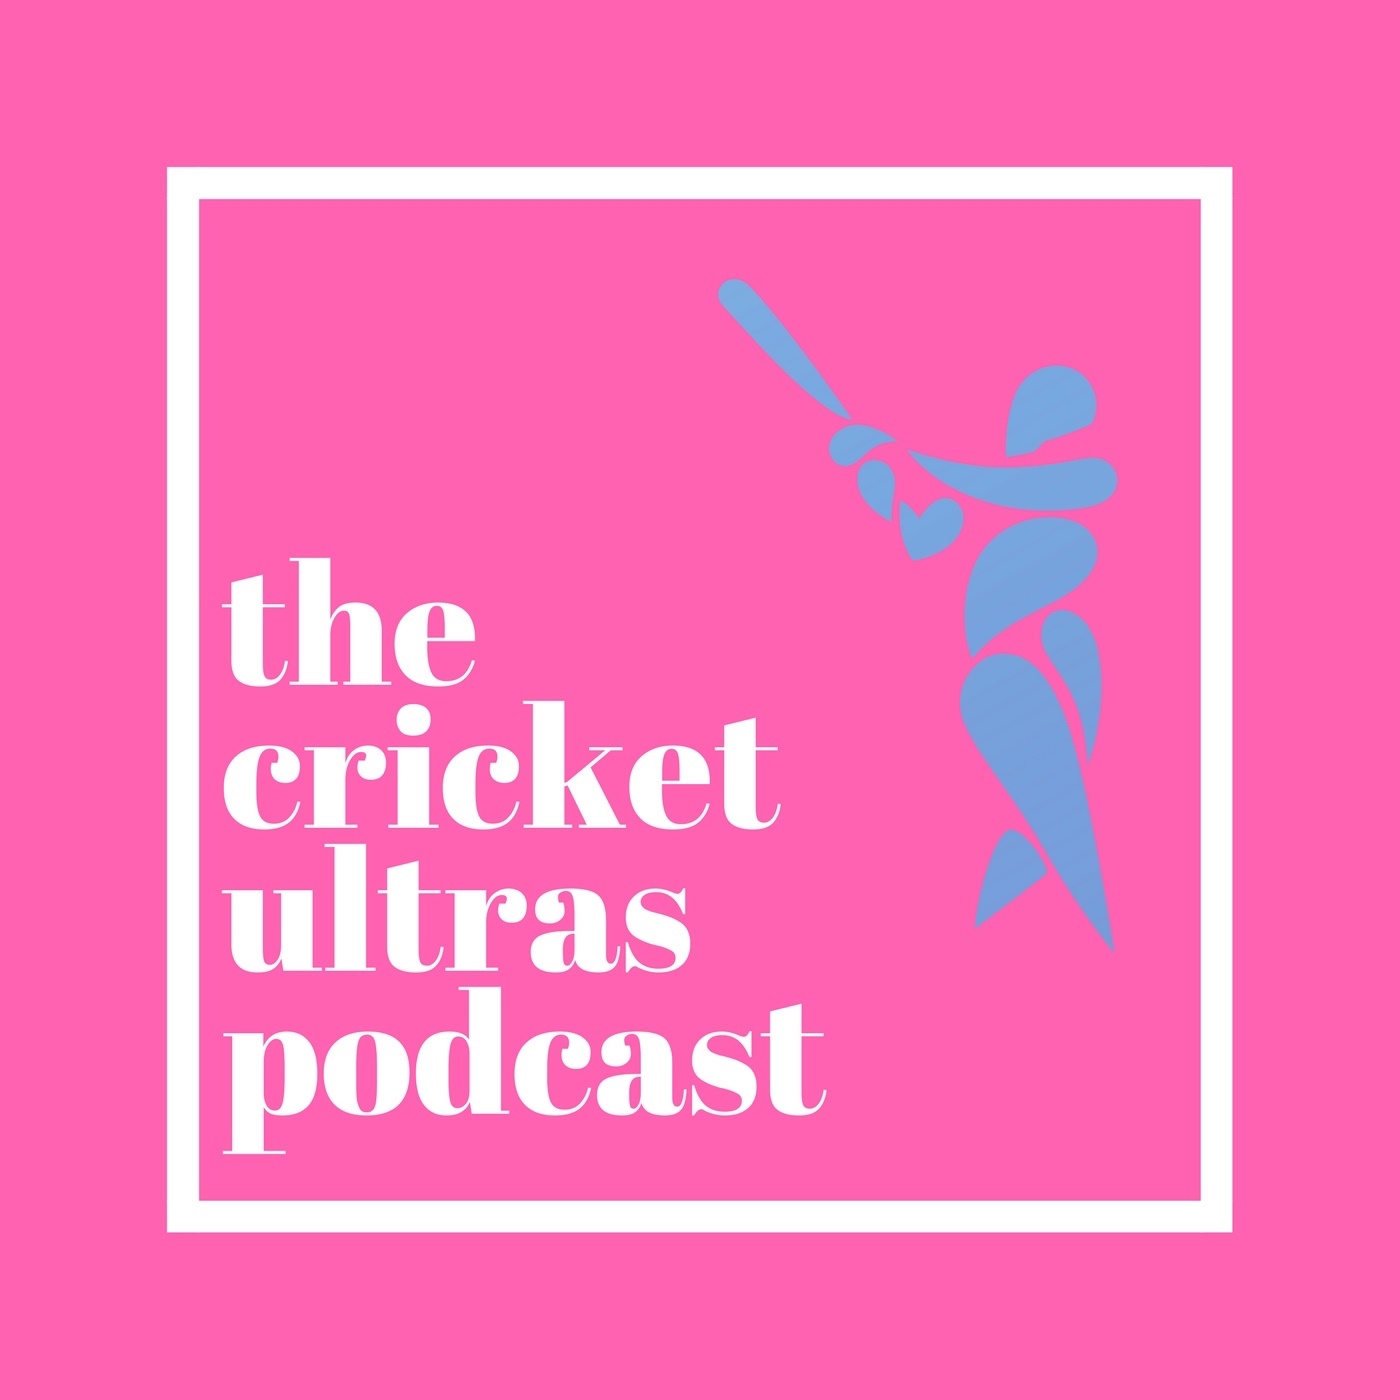 Ep 16: Cricket in North Korea; Kim Jong-Il’s PR firm; Ireland’s Test debut; Aus coaching reshuffle & more